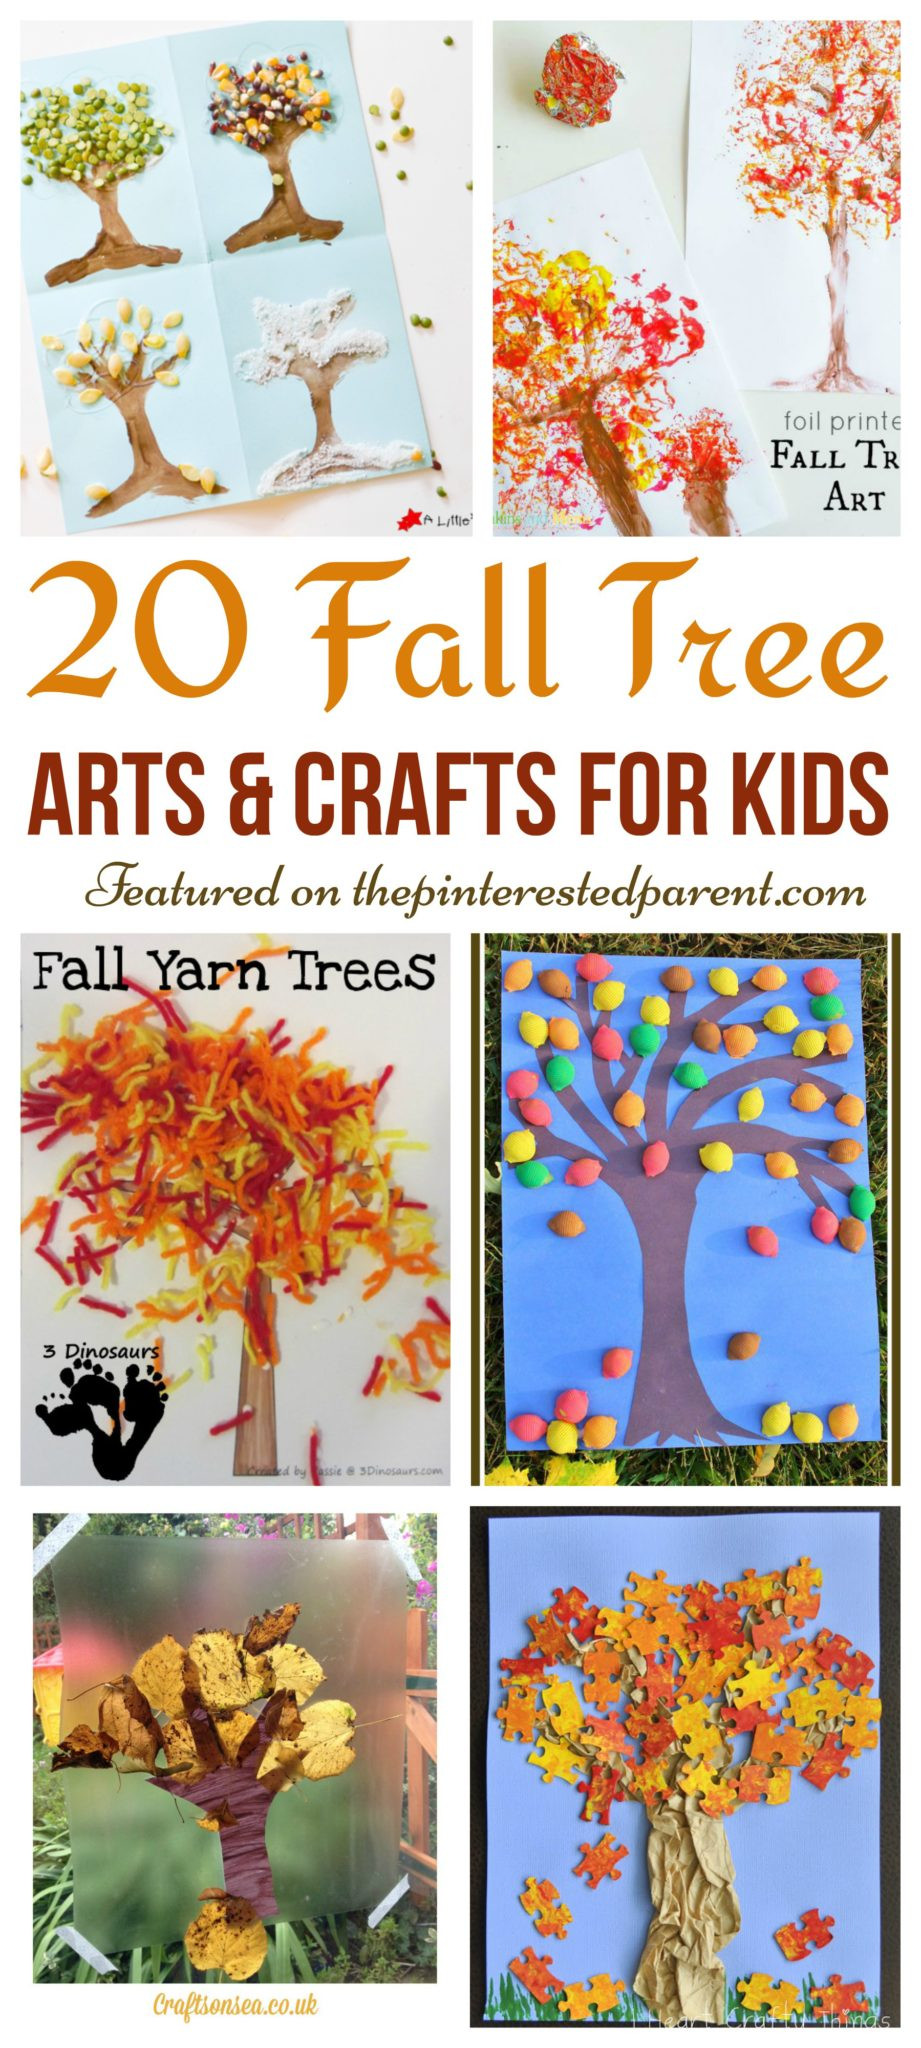 Art Project Ideas For Preschoolers
 20 Fall Tree Arts & Crafts Ideas For Kids – The